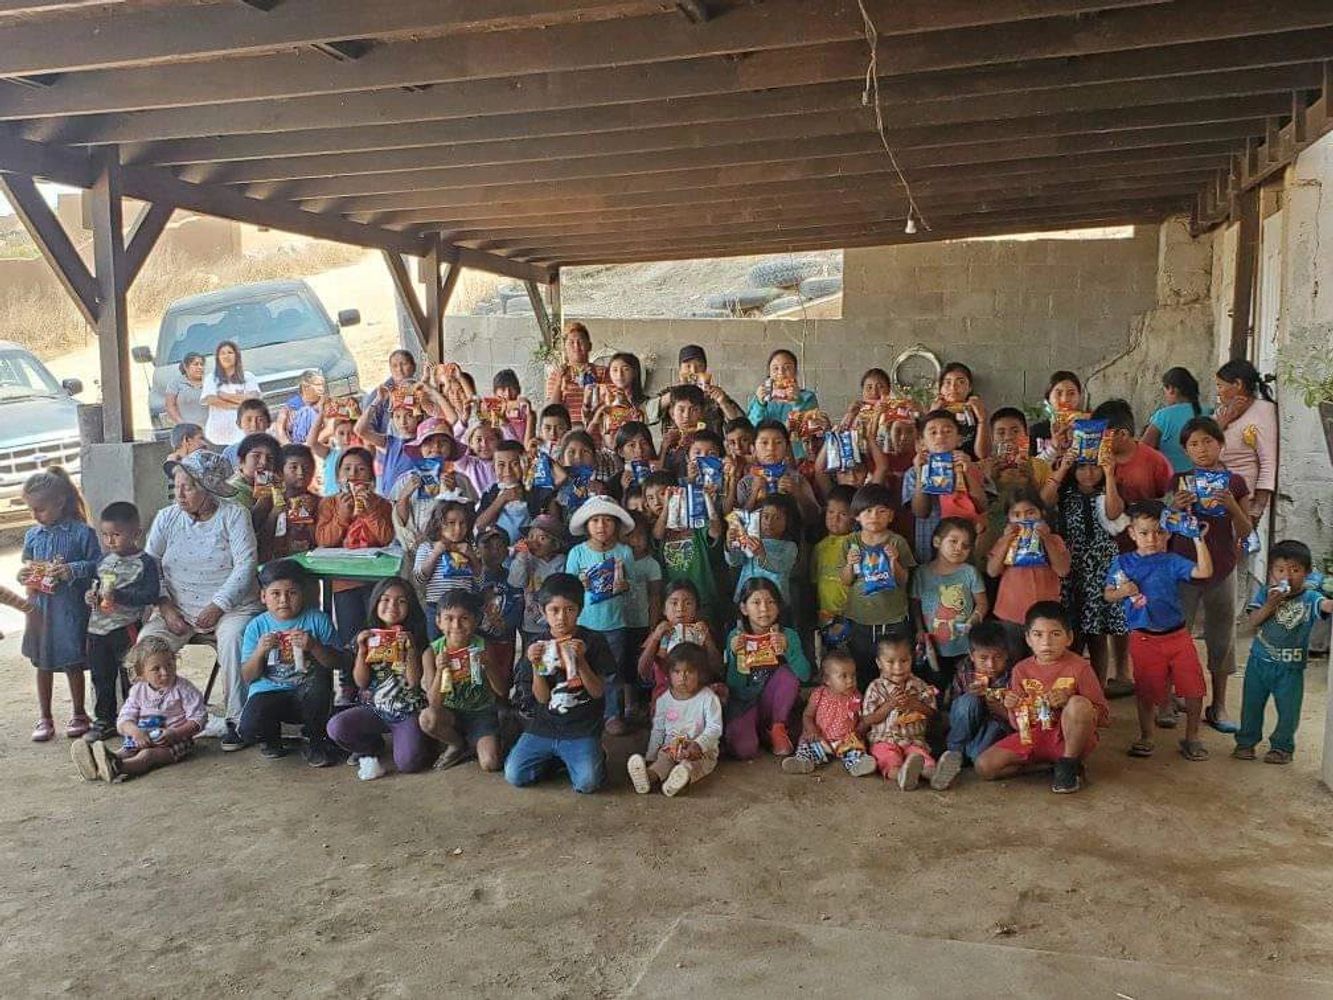 Joshua House children in Esenada, Mexico with food donated through Born Again Ministry